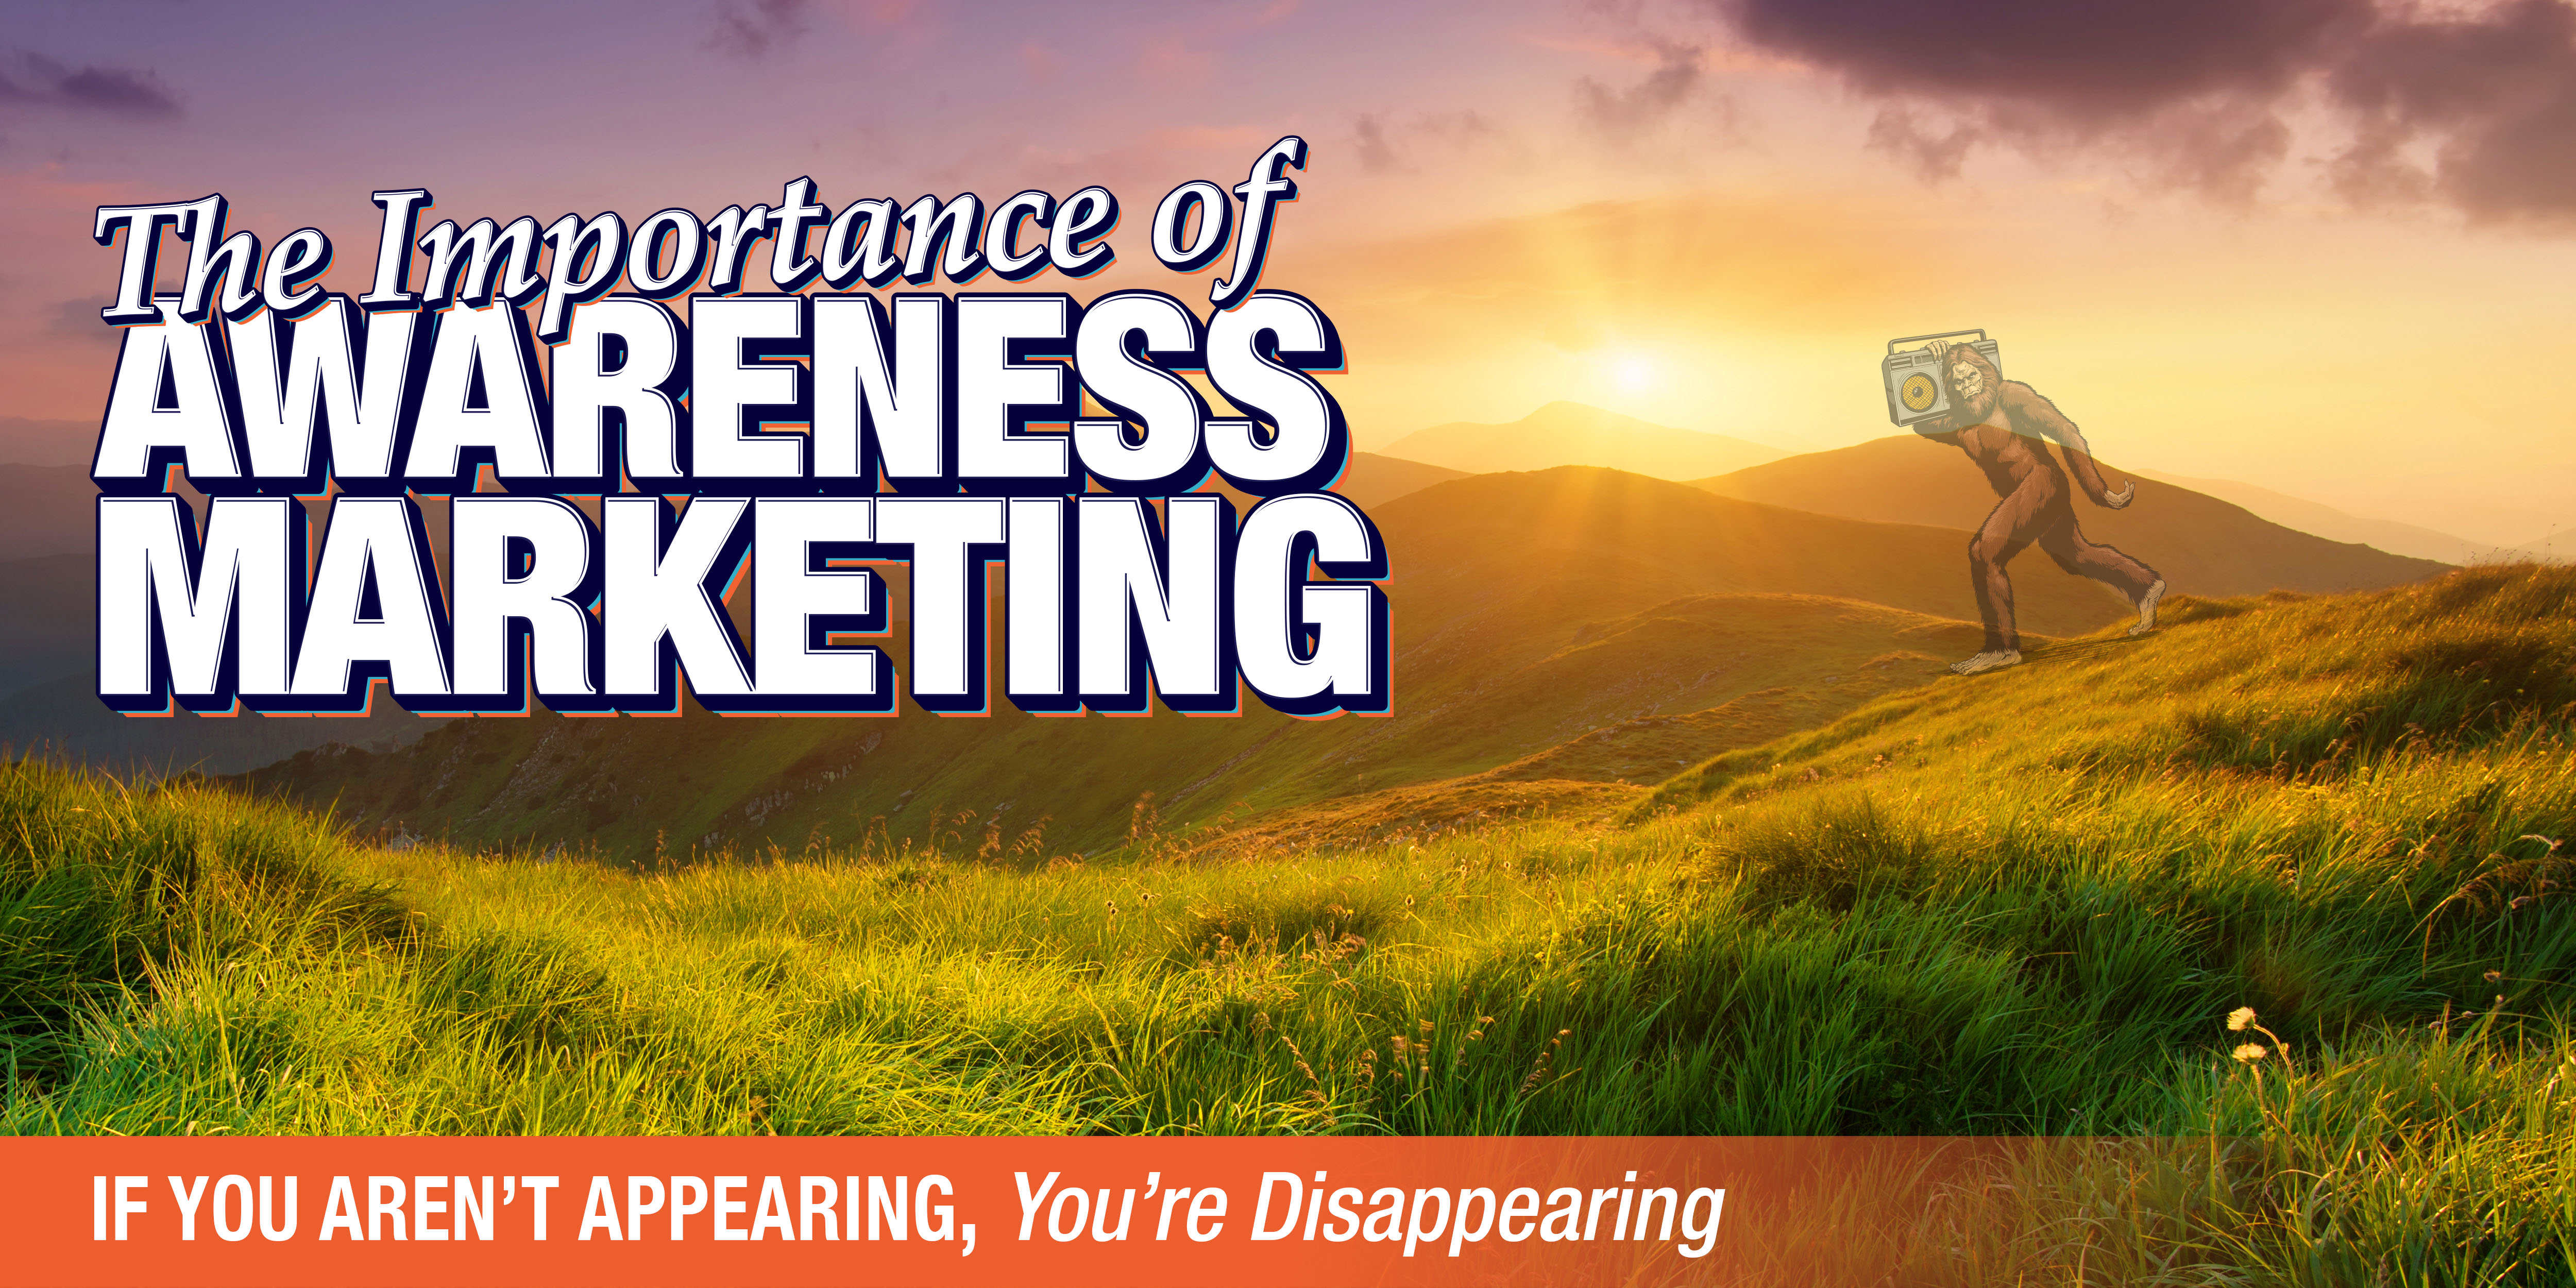 The Importance of Awareness Marketing